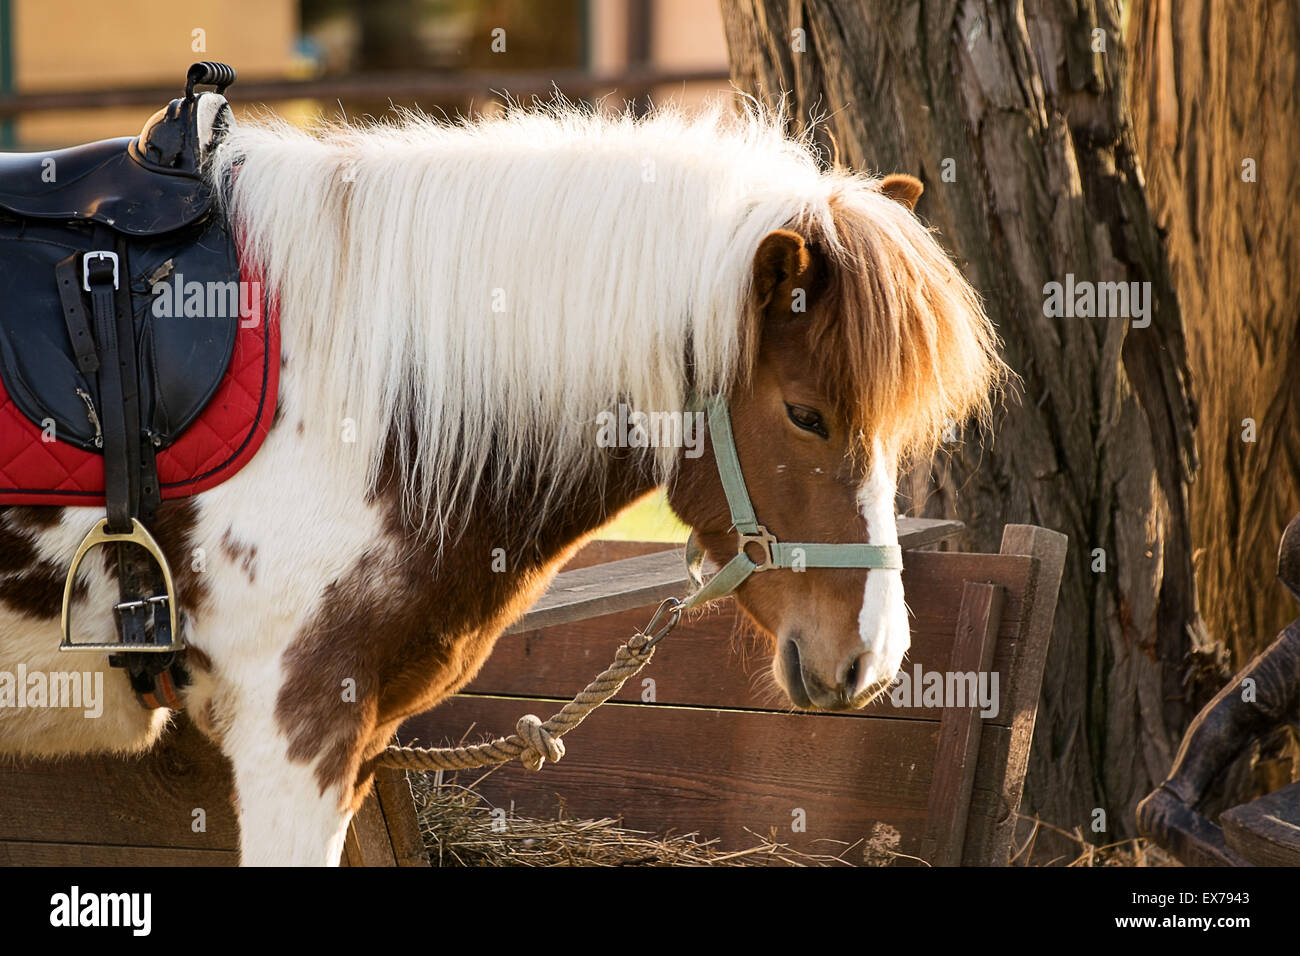 Portrait of white and brown saddled pony horse tied to  the cuddle. Stock Photo